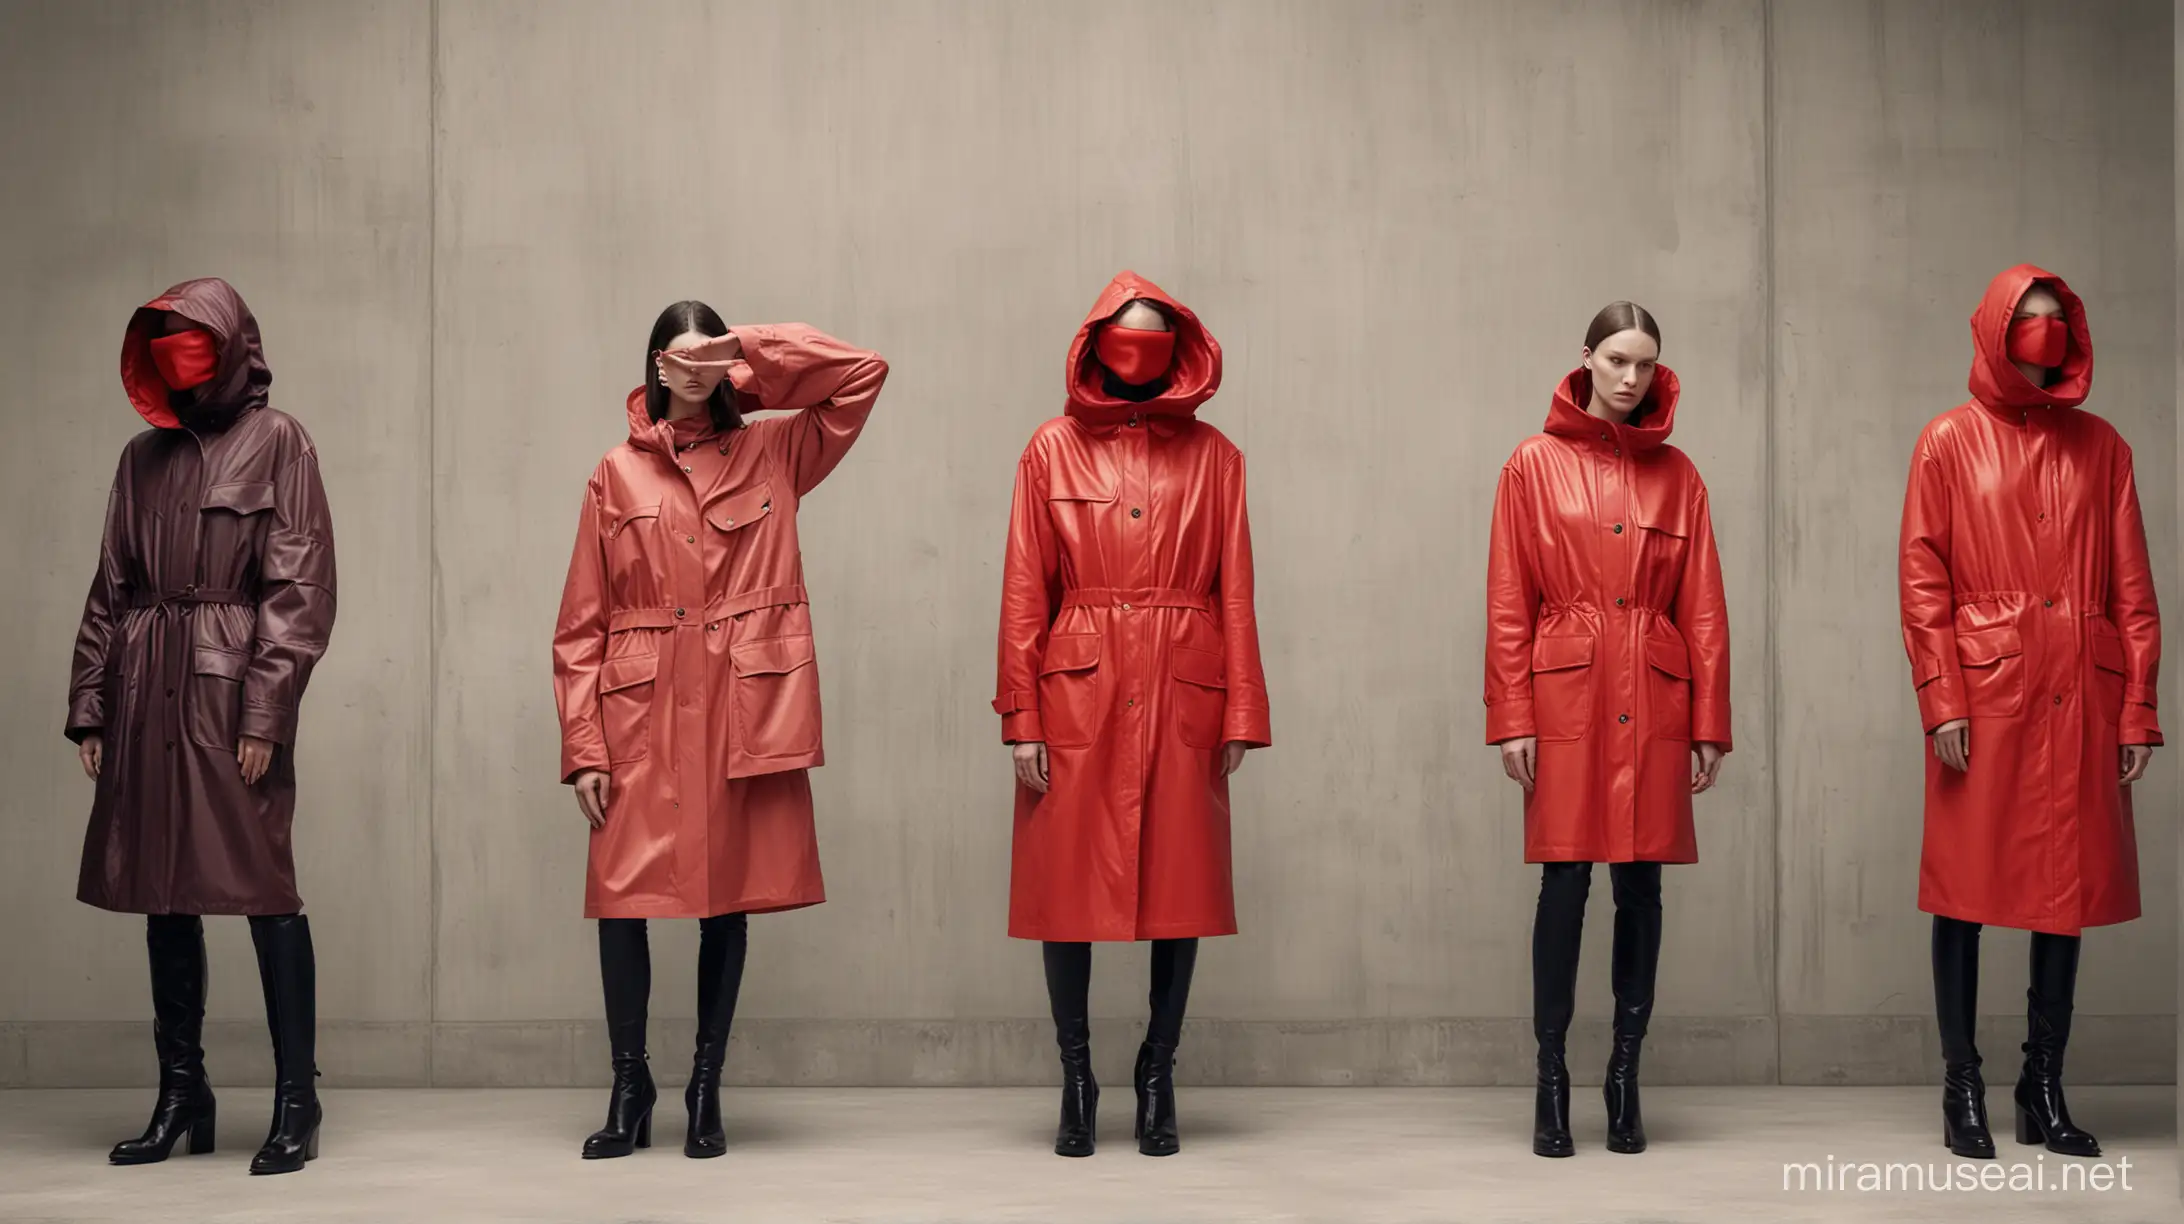 show me an advertising campaign for Balenciaga. The models are wearing oversize Balenciaga clothes. The models are hiding their eyes and ears with their hands. One of the models is wearing a straight-jacket. The image has to be minimalistic. The wall behind the models is red. 